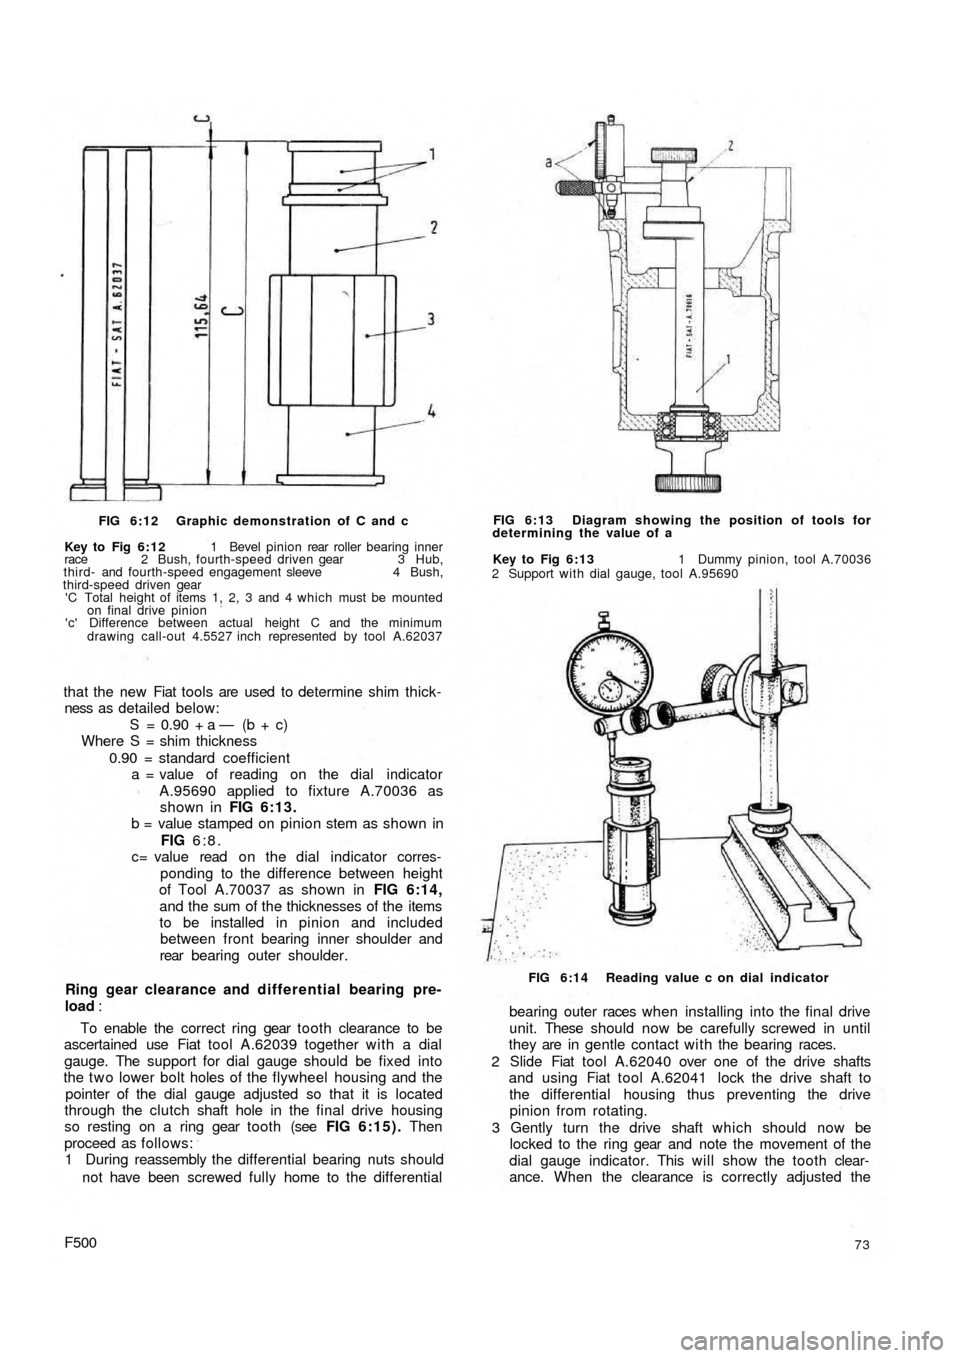 FIAT 500 1957 1.G Workshop Manual FIG 6:12 Graphic demonstration  of C and c
Key to Fig 6:12 1 Bevel pinion rear roller bearing inner
race 2 Bush, fourth-speed driven gear 3 Hub,
third- and fourth-speed engagement sleeve 4 Bush,
third